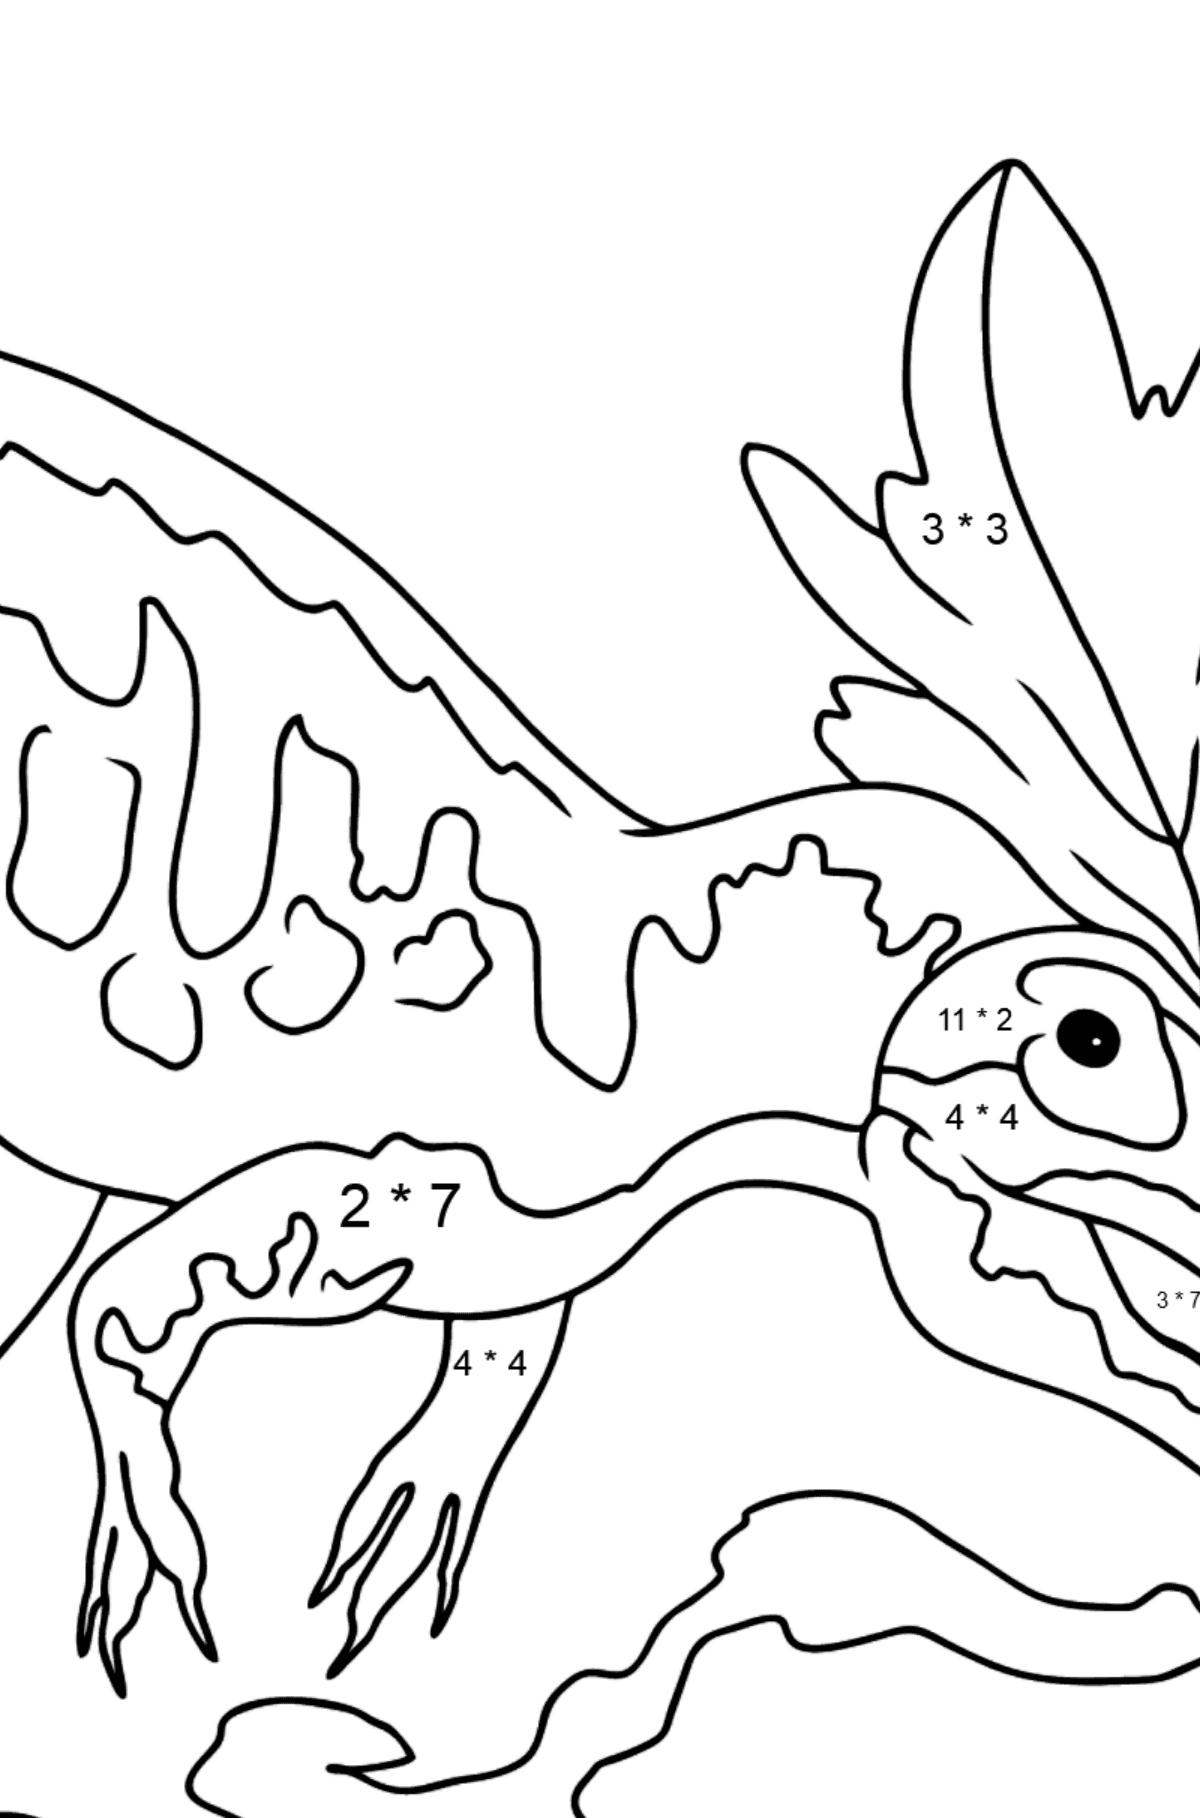 Allosaurus picture - Math Coloring - Multiplication for Kids